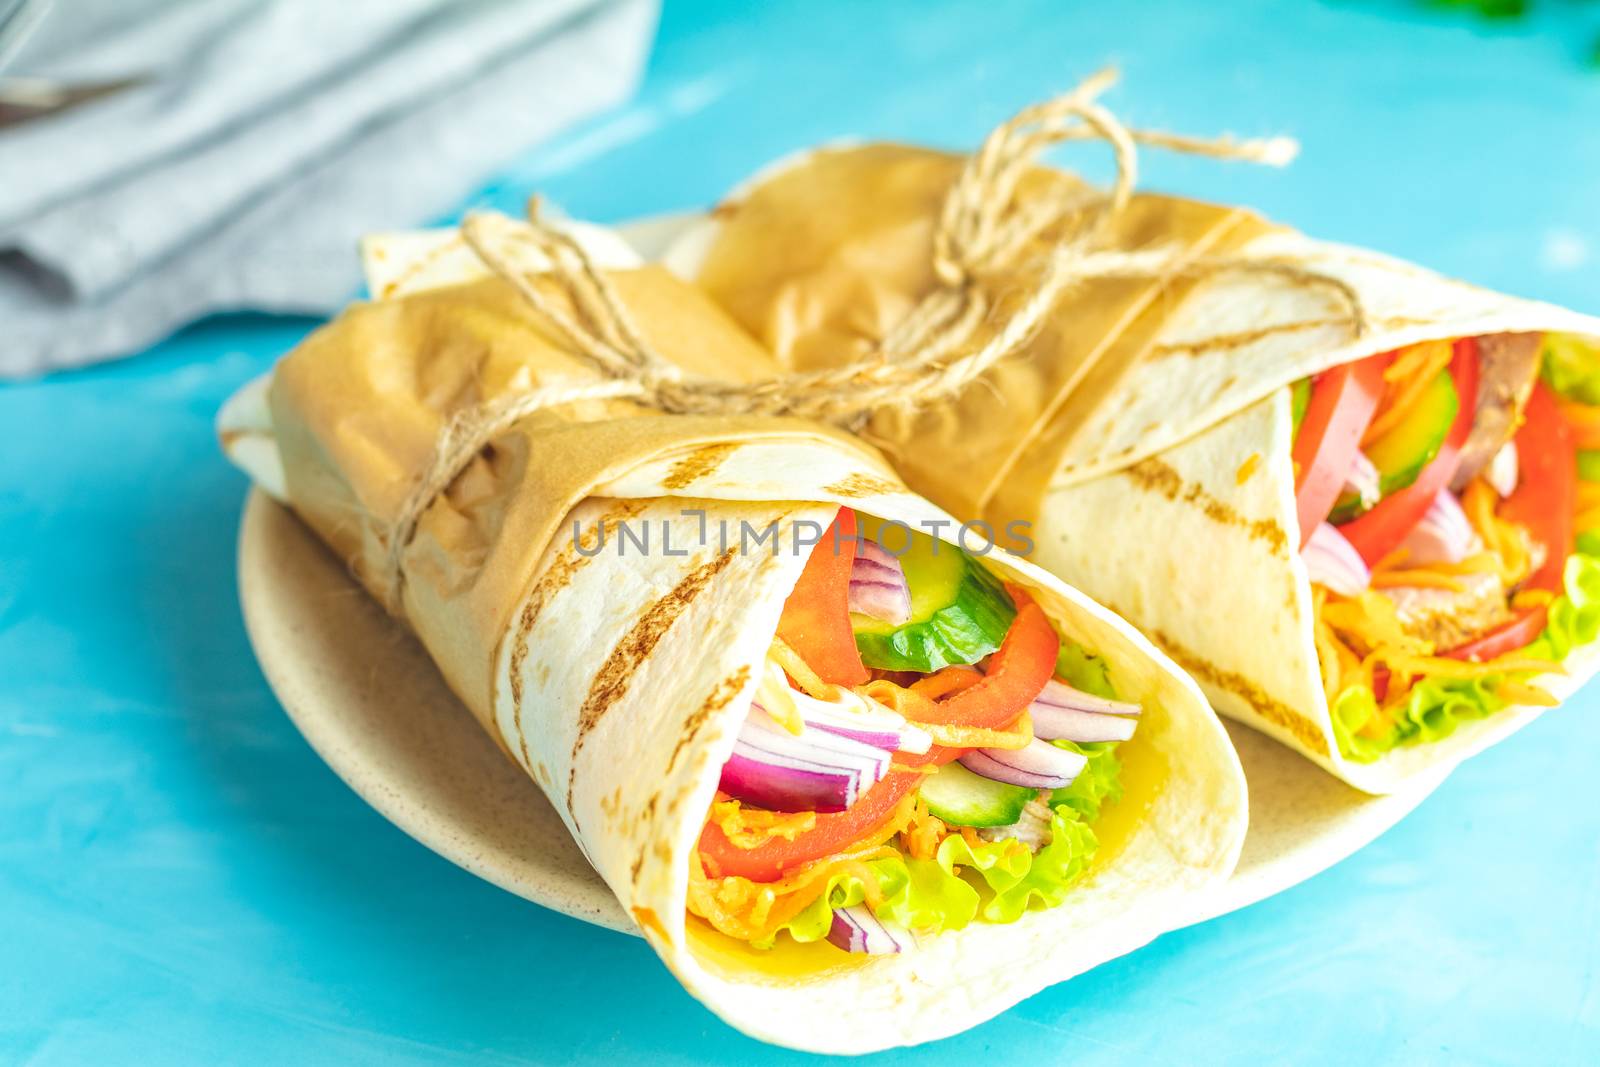 Shawarma sandwich gyro fresh roll of lavash (pita bread) chicken beef shawarma falafel RecipeTin Eats Filled with grilled meat, vegetables, cheese. Traditional Middle Eastern snack.